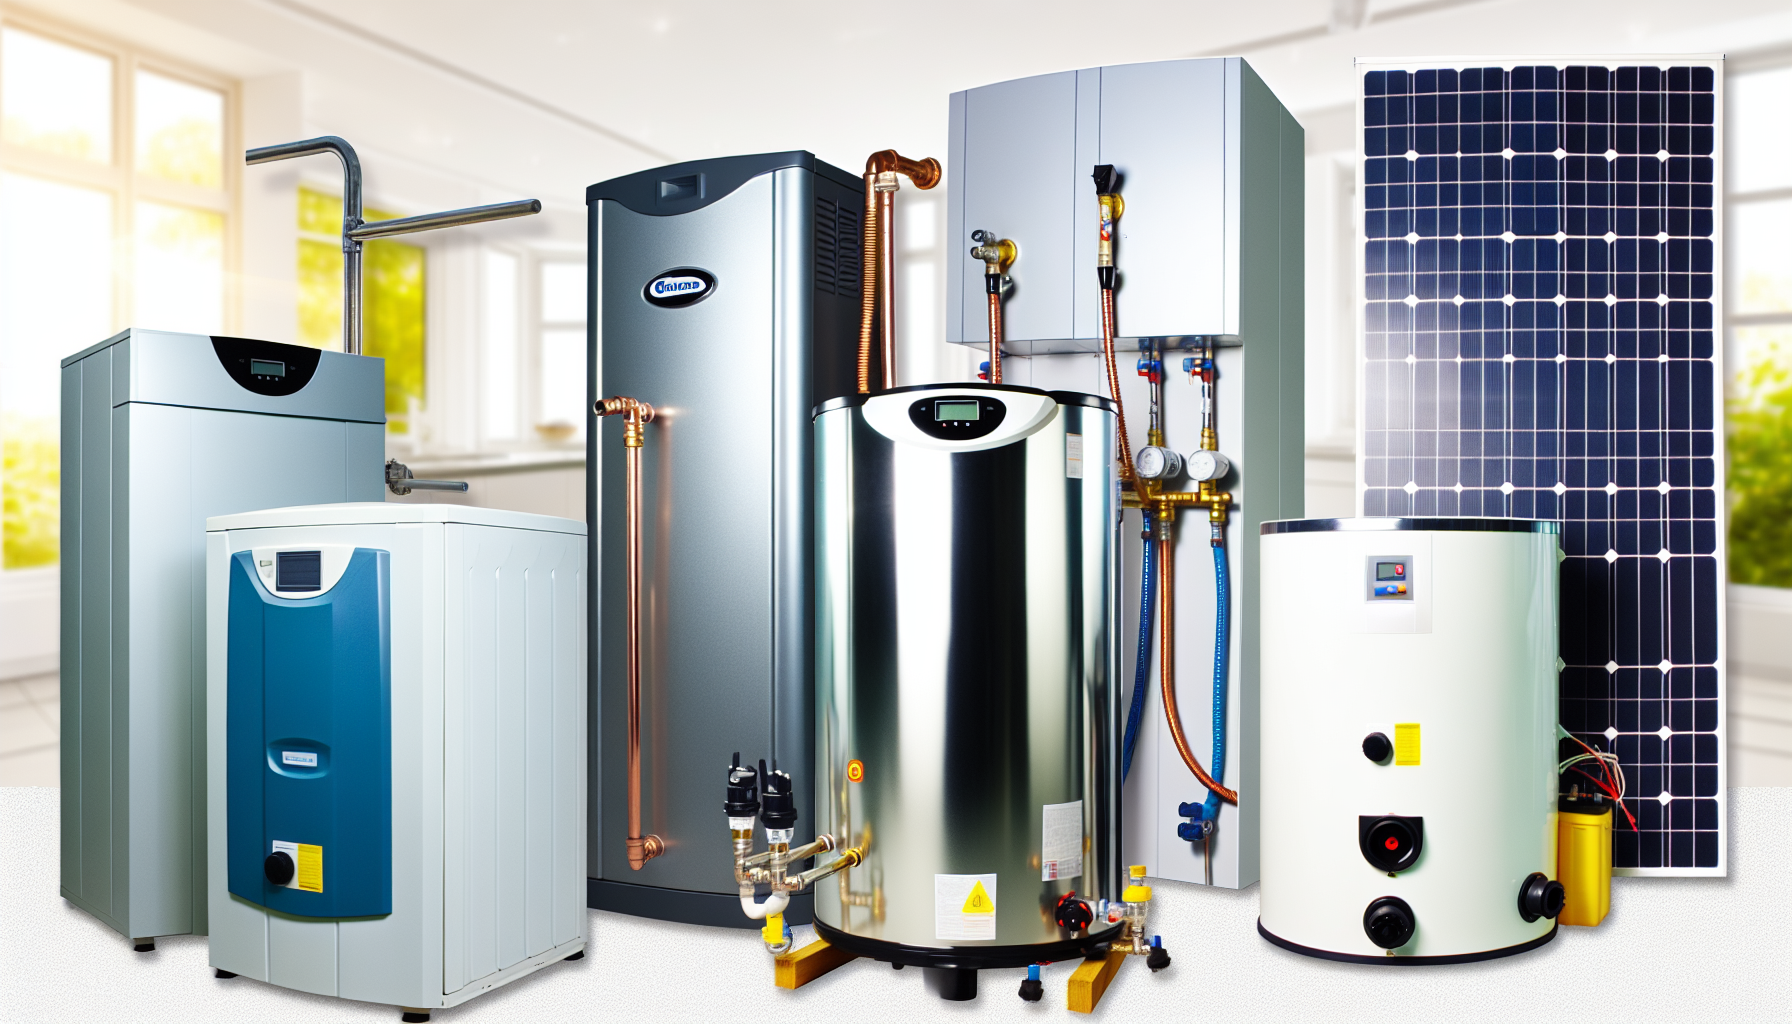 A diverse range of hot water systems including gas, electric, and solar options available at InstalledToday